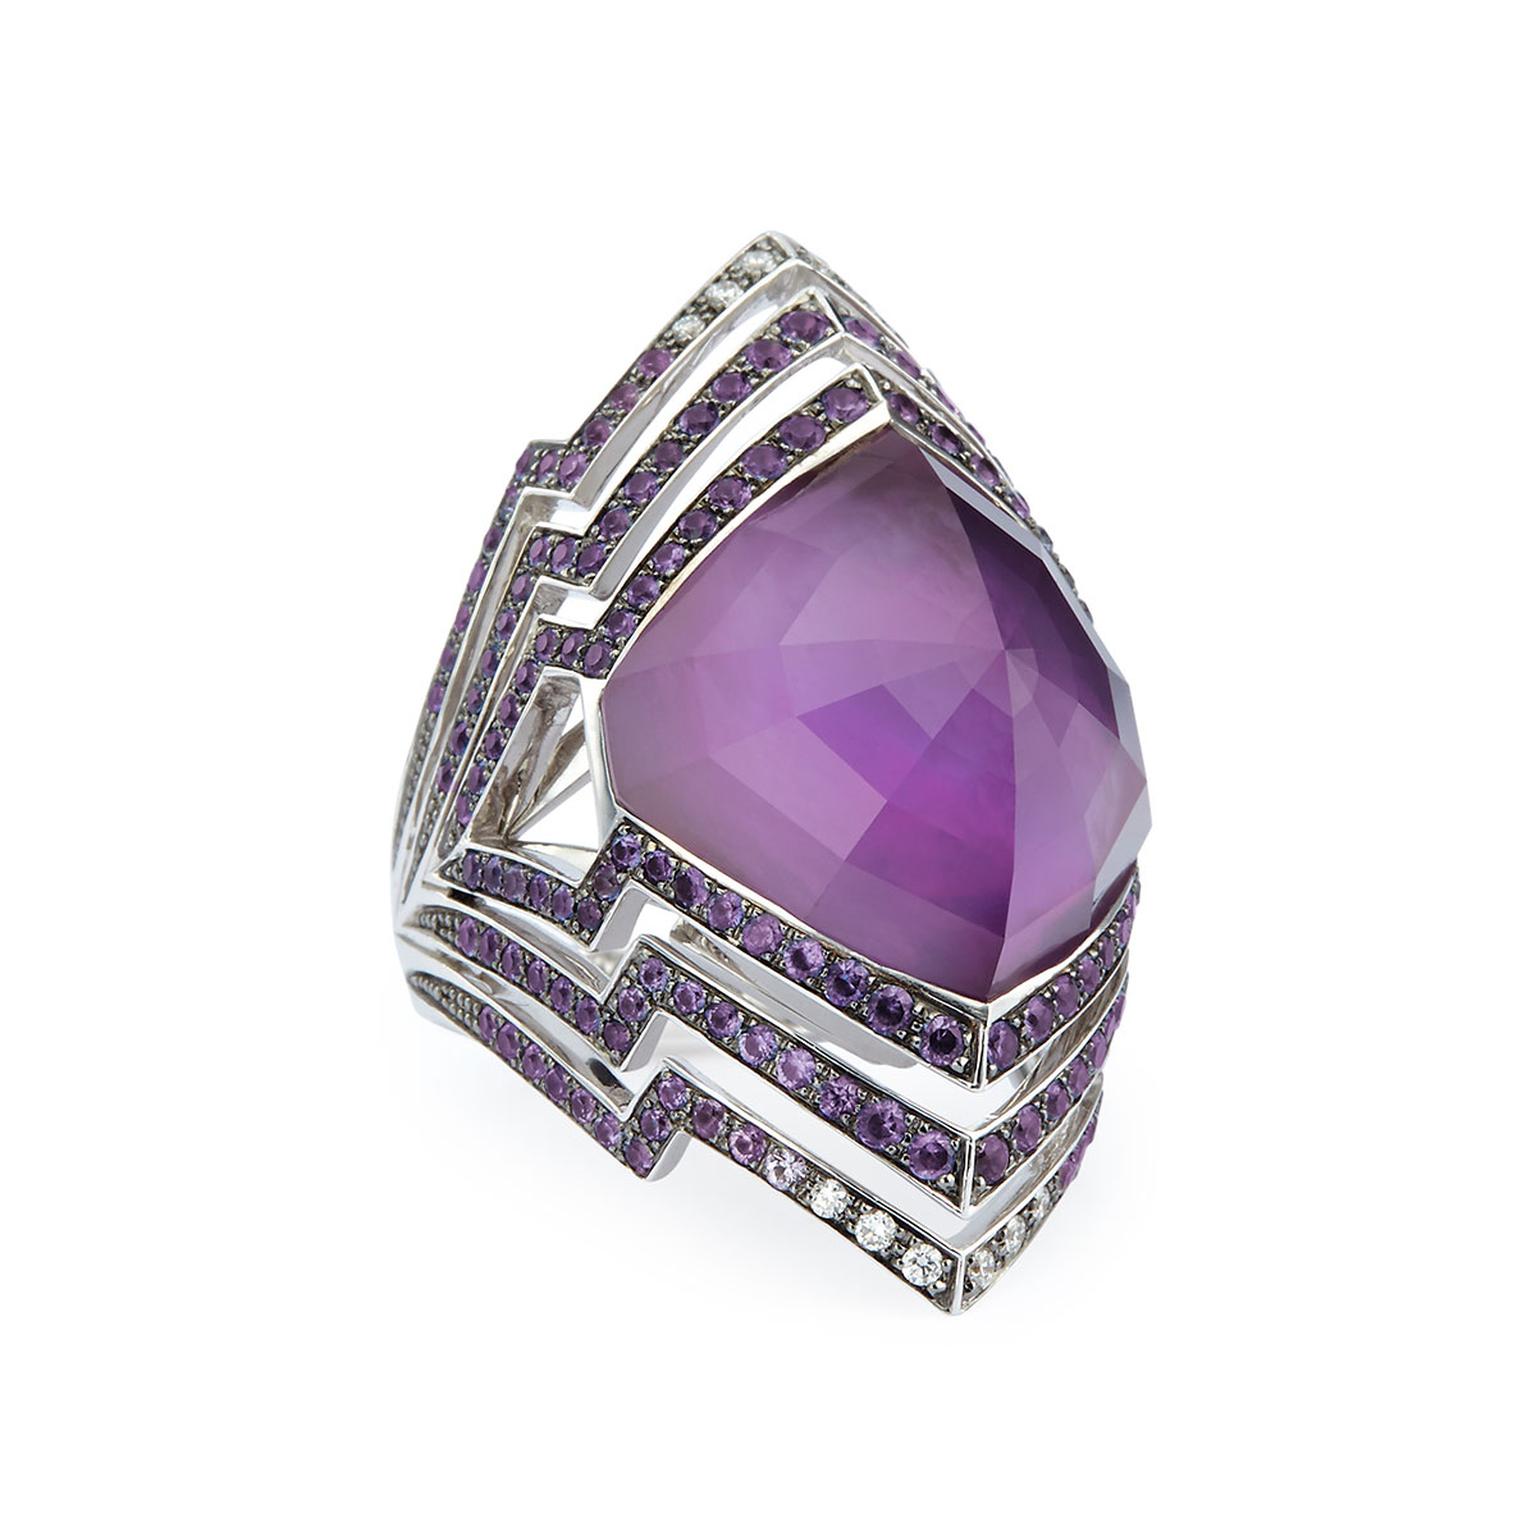 Stephen Webster Lady Stardust amethyst cocktail ring